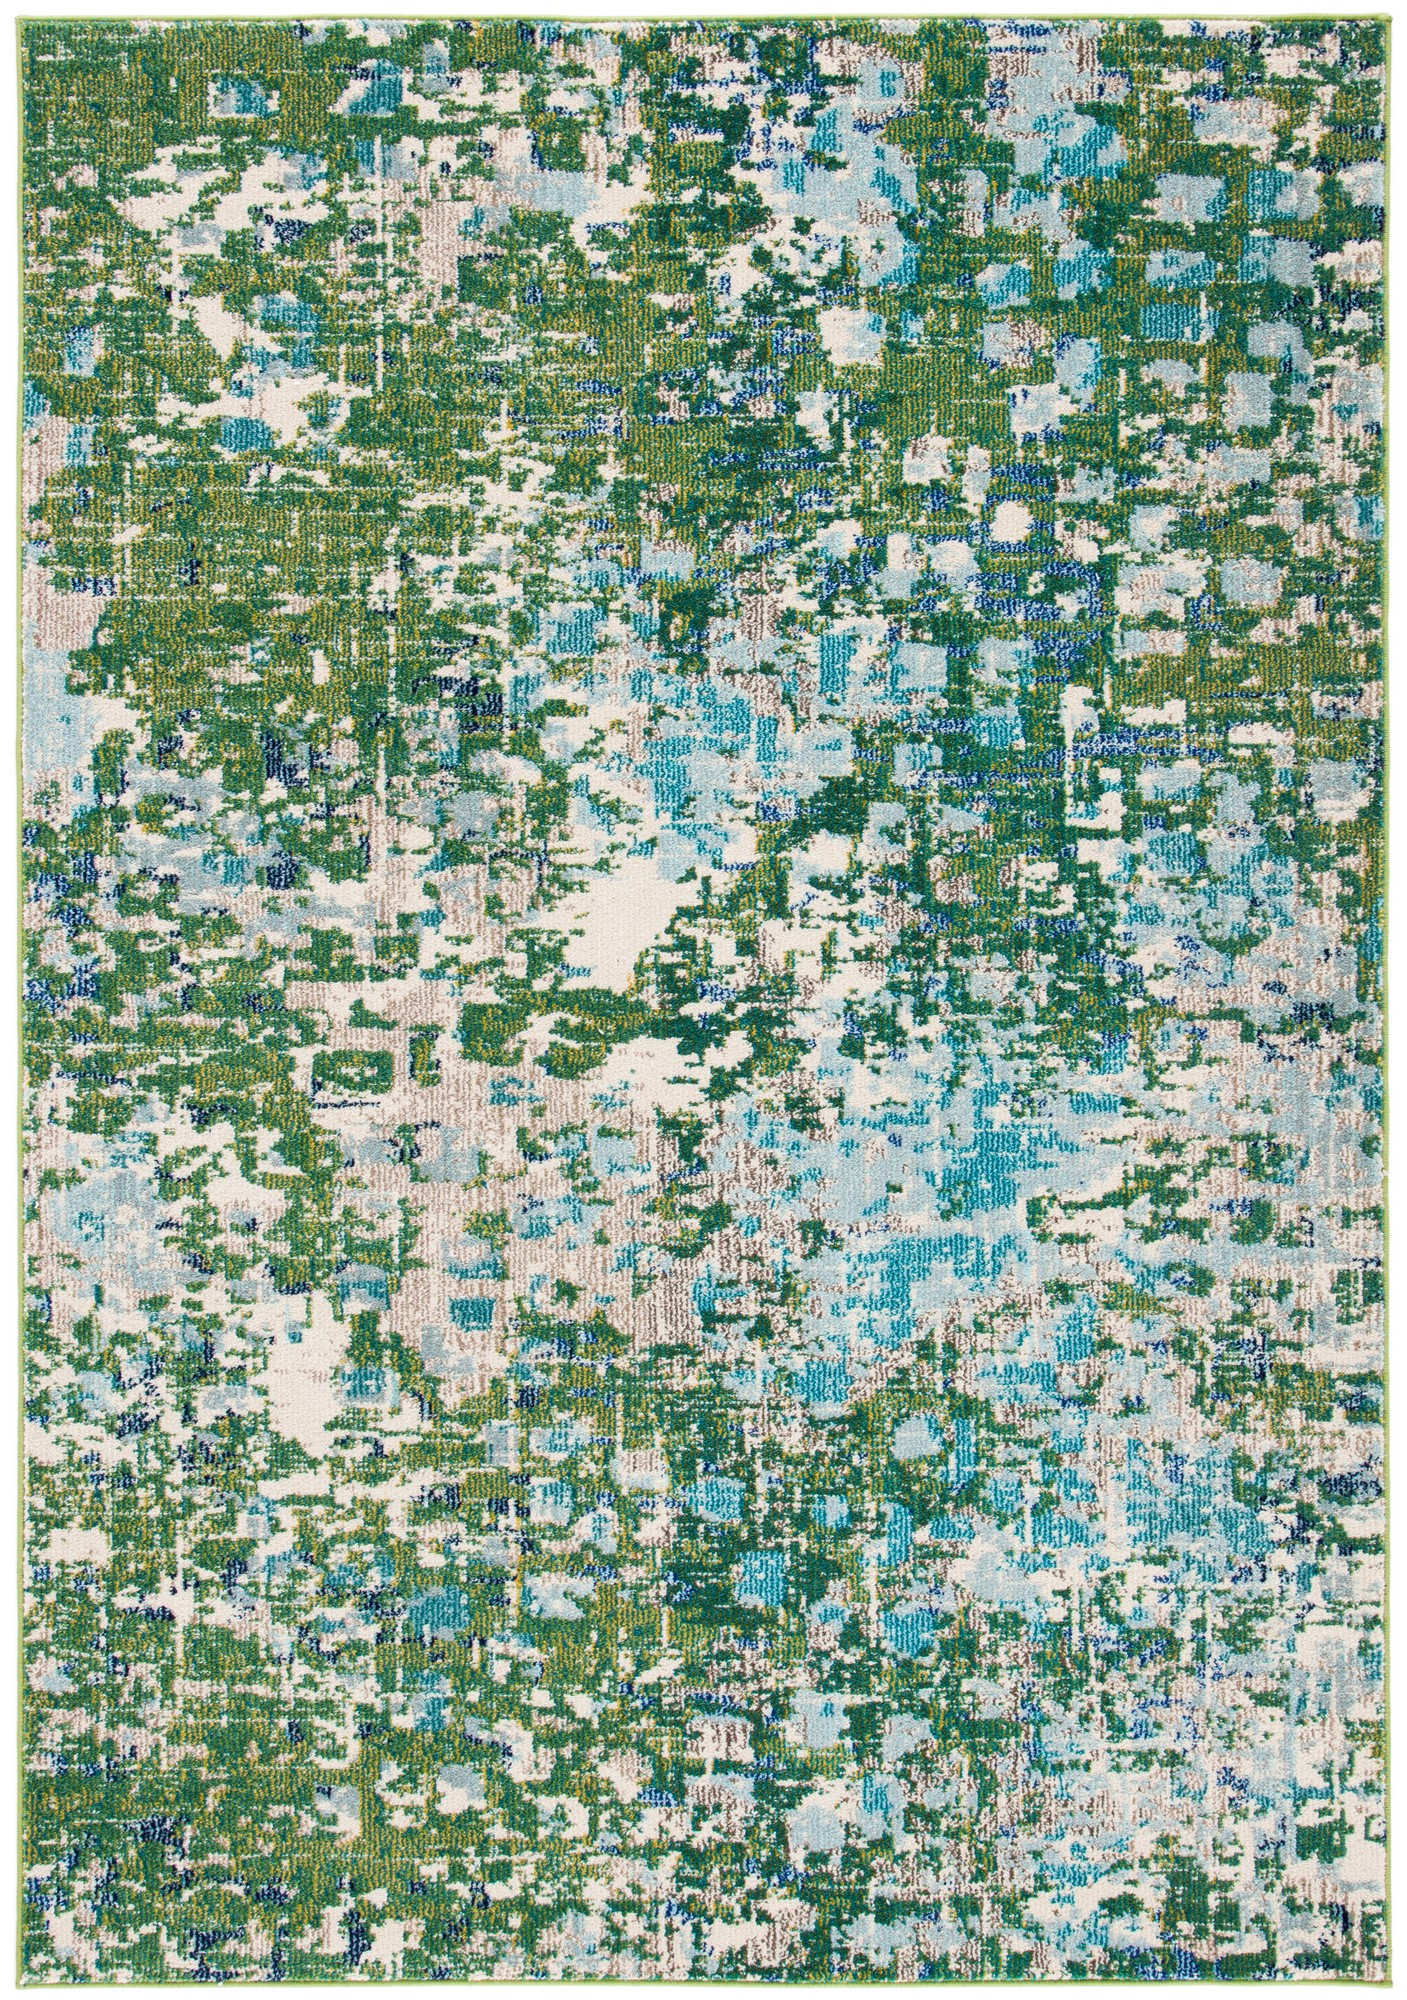 SAFAVIEH Madison Candelario Abstract Polka Dots Area Rug, Green/Turquoise, 5'3" x 7'6" - image 1 of 8